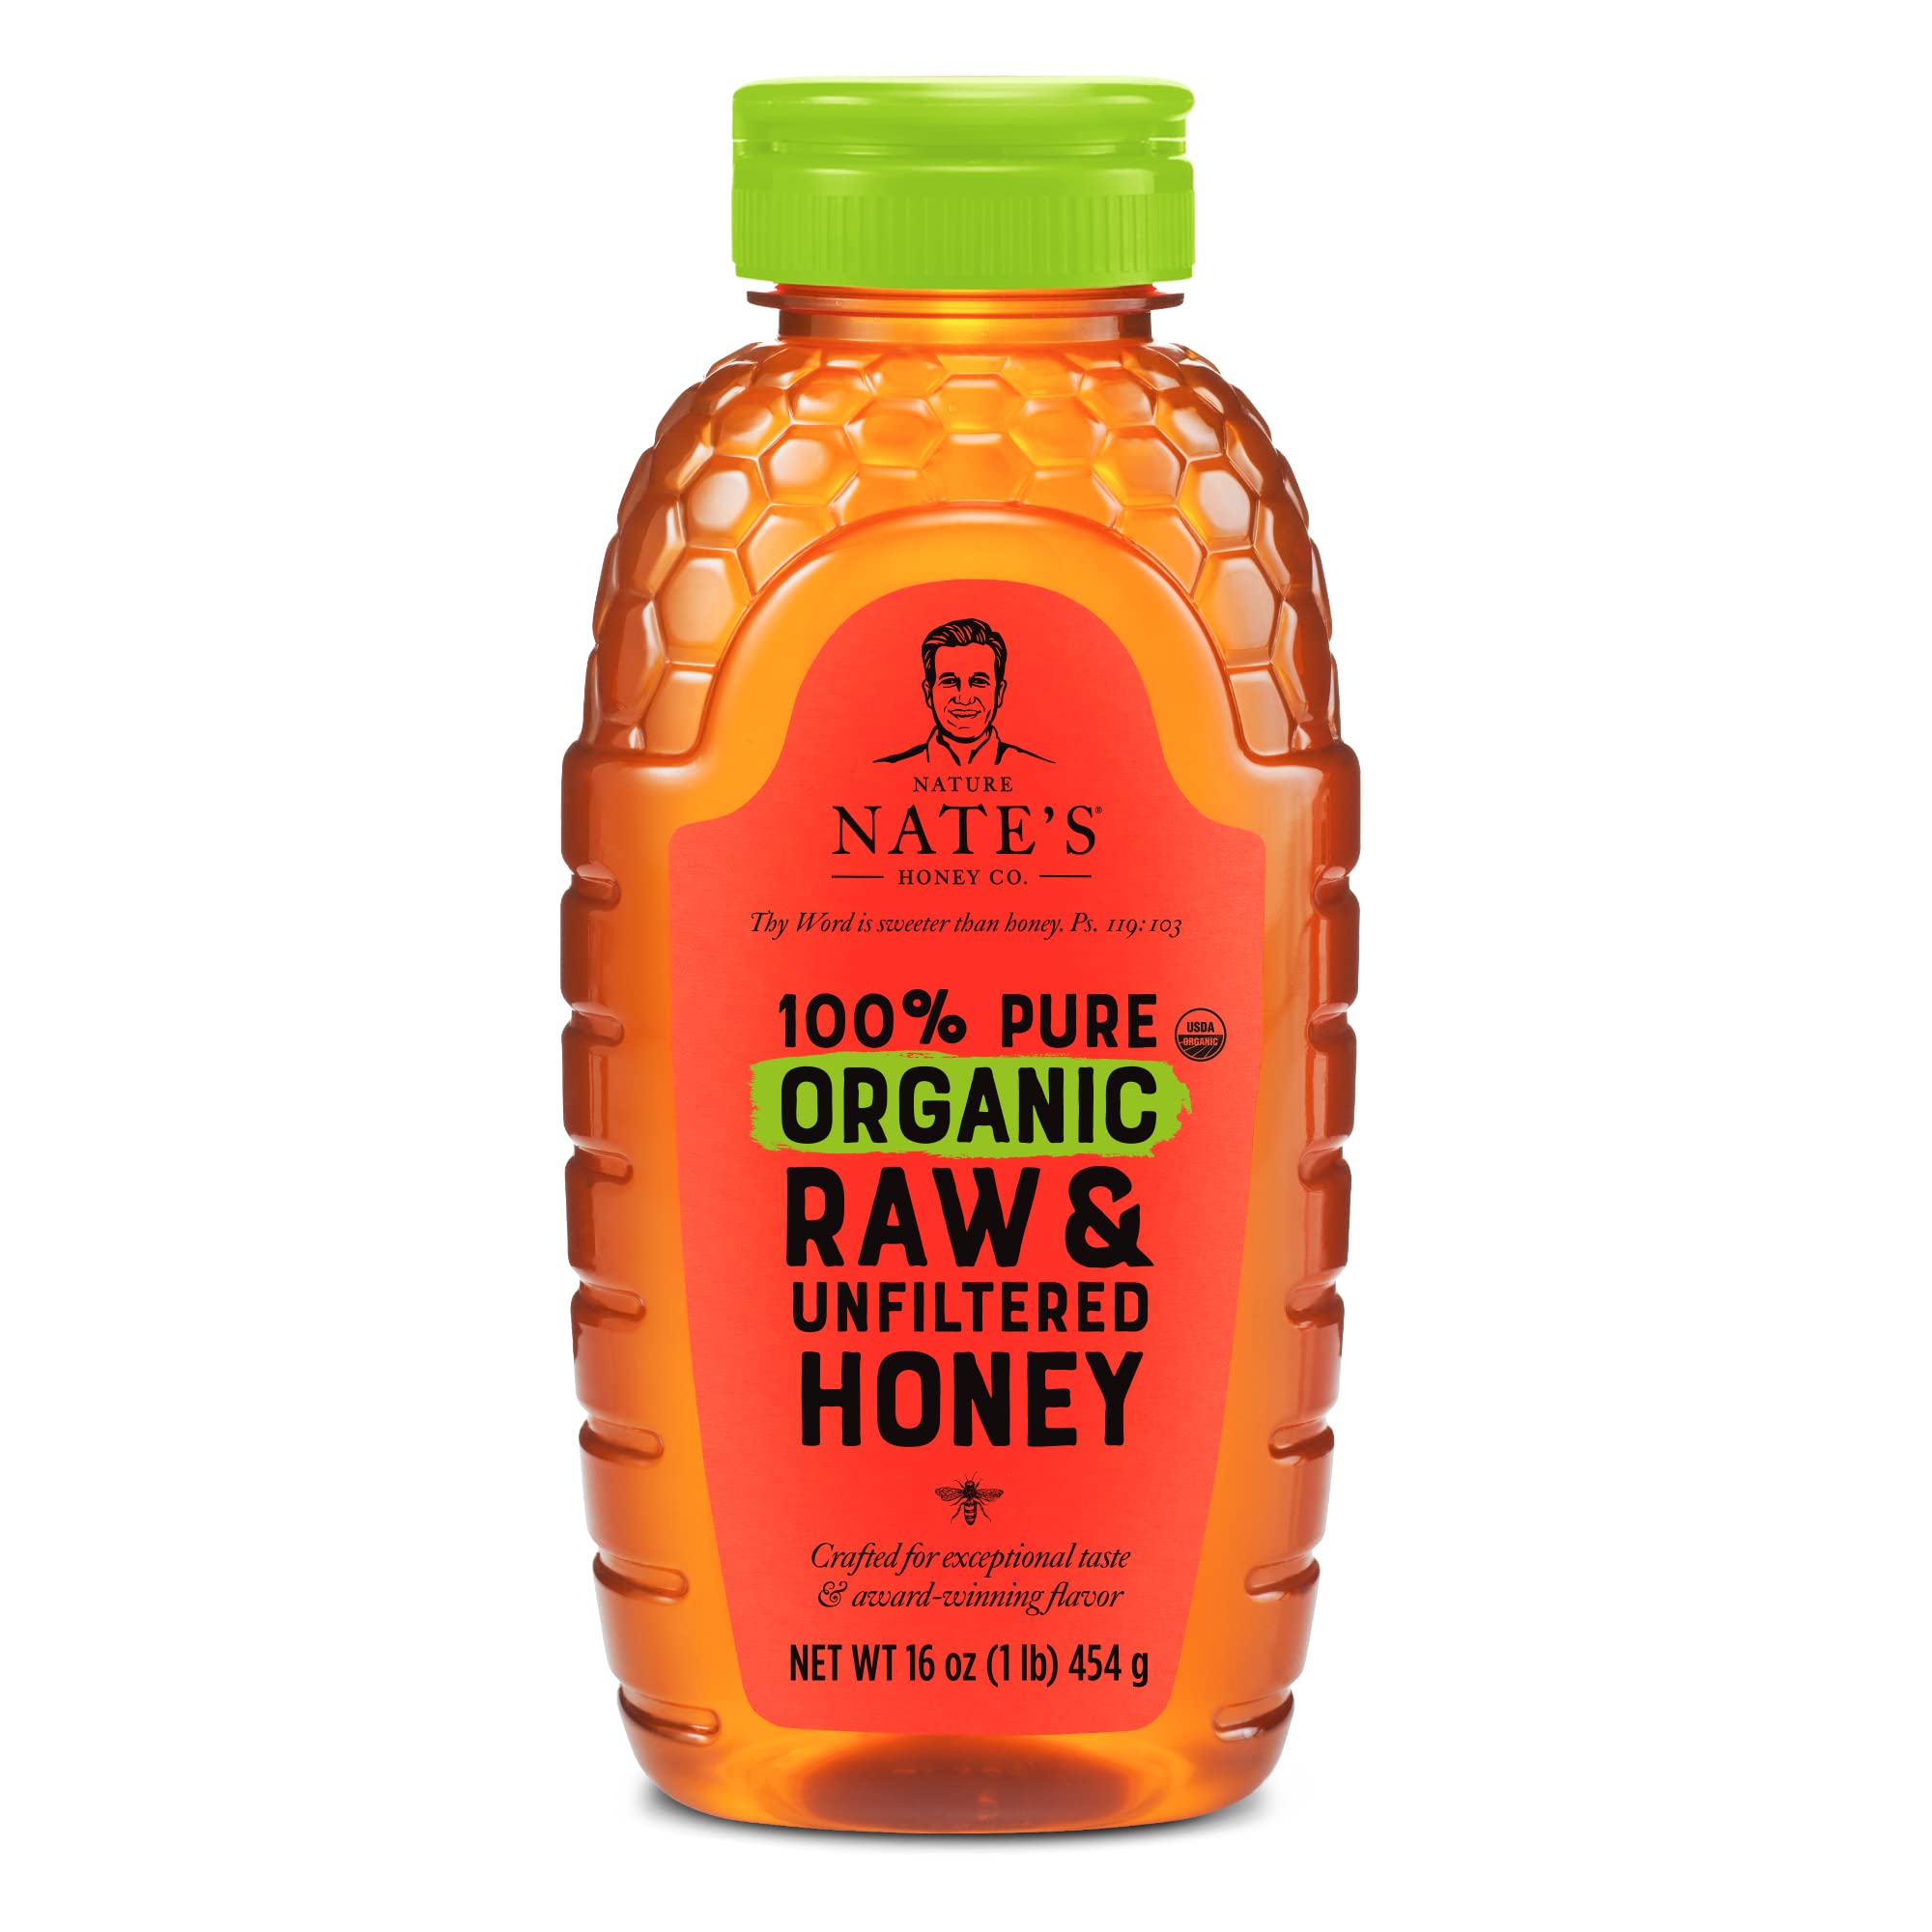 16oz. Nate's Organic 100% Pure, Raw & Unfiltered Honey - USDA Certified Organic - Squeeze Bottle $5.25 + Free Shipping w/ Prime or on $35+